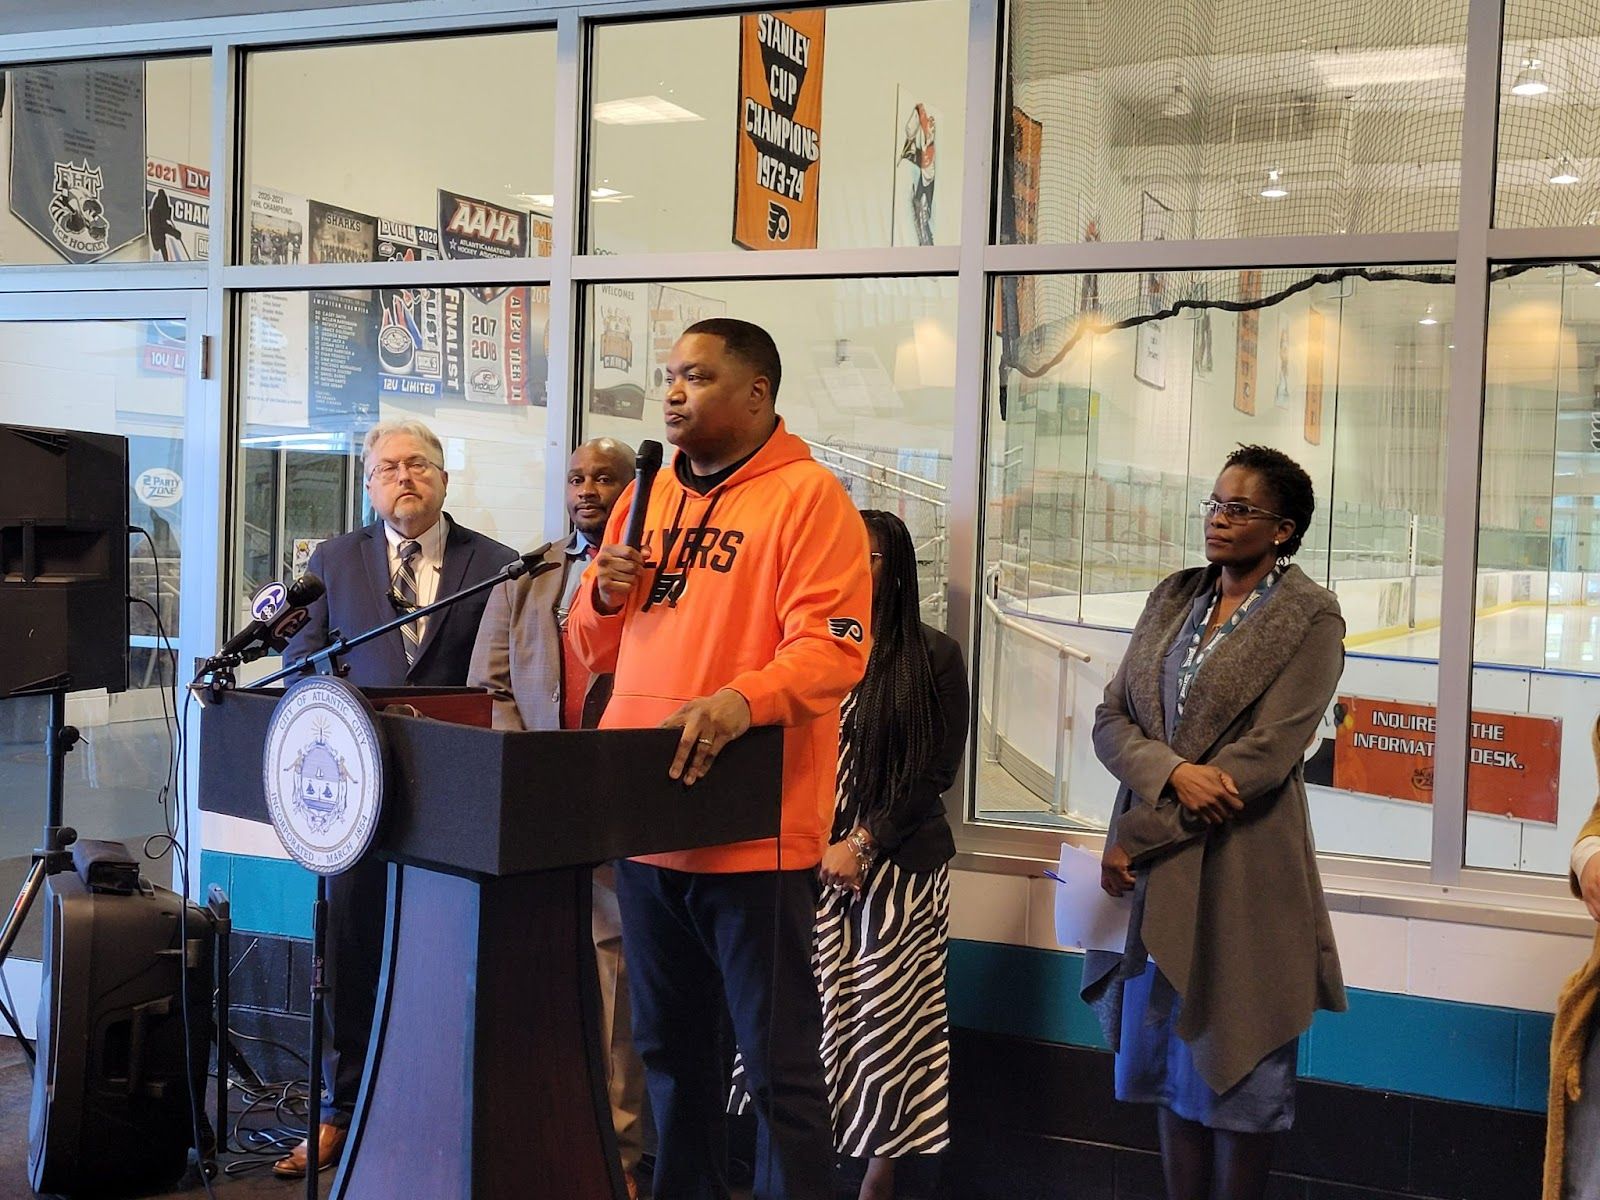 Mayor Marty Small Sr. holds a news conference at the Atlantic City Skate Zone: Image Source: City of Atlantic City